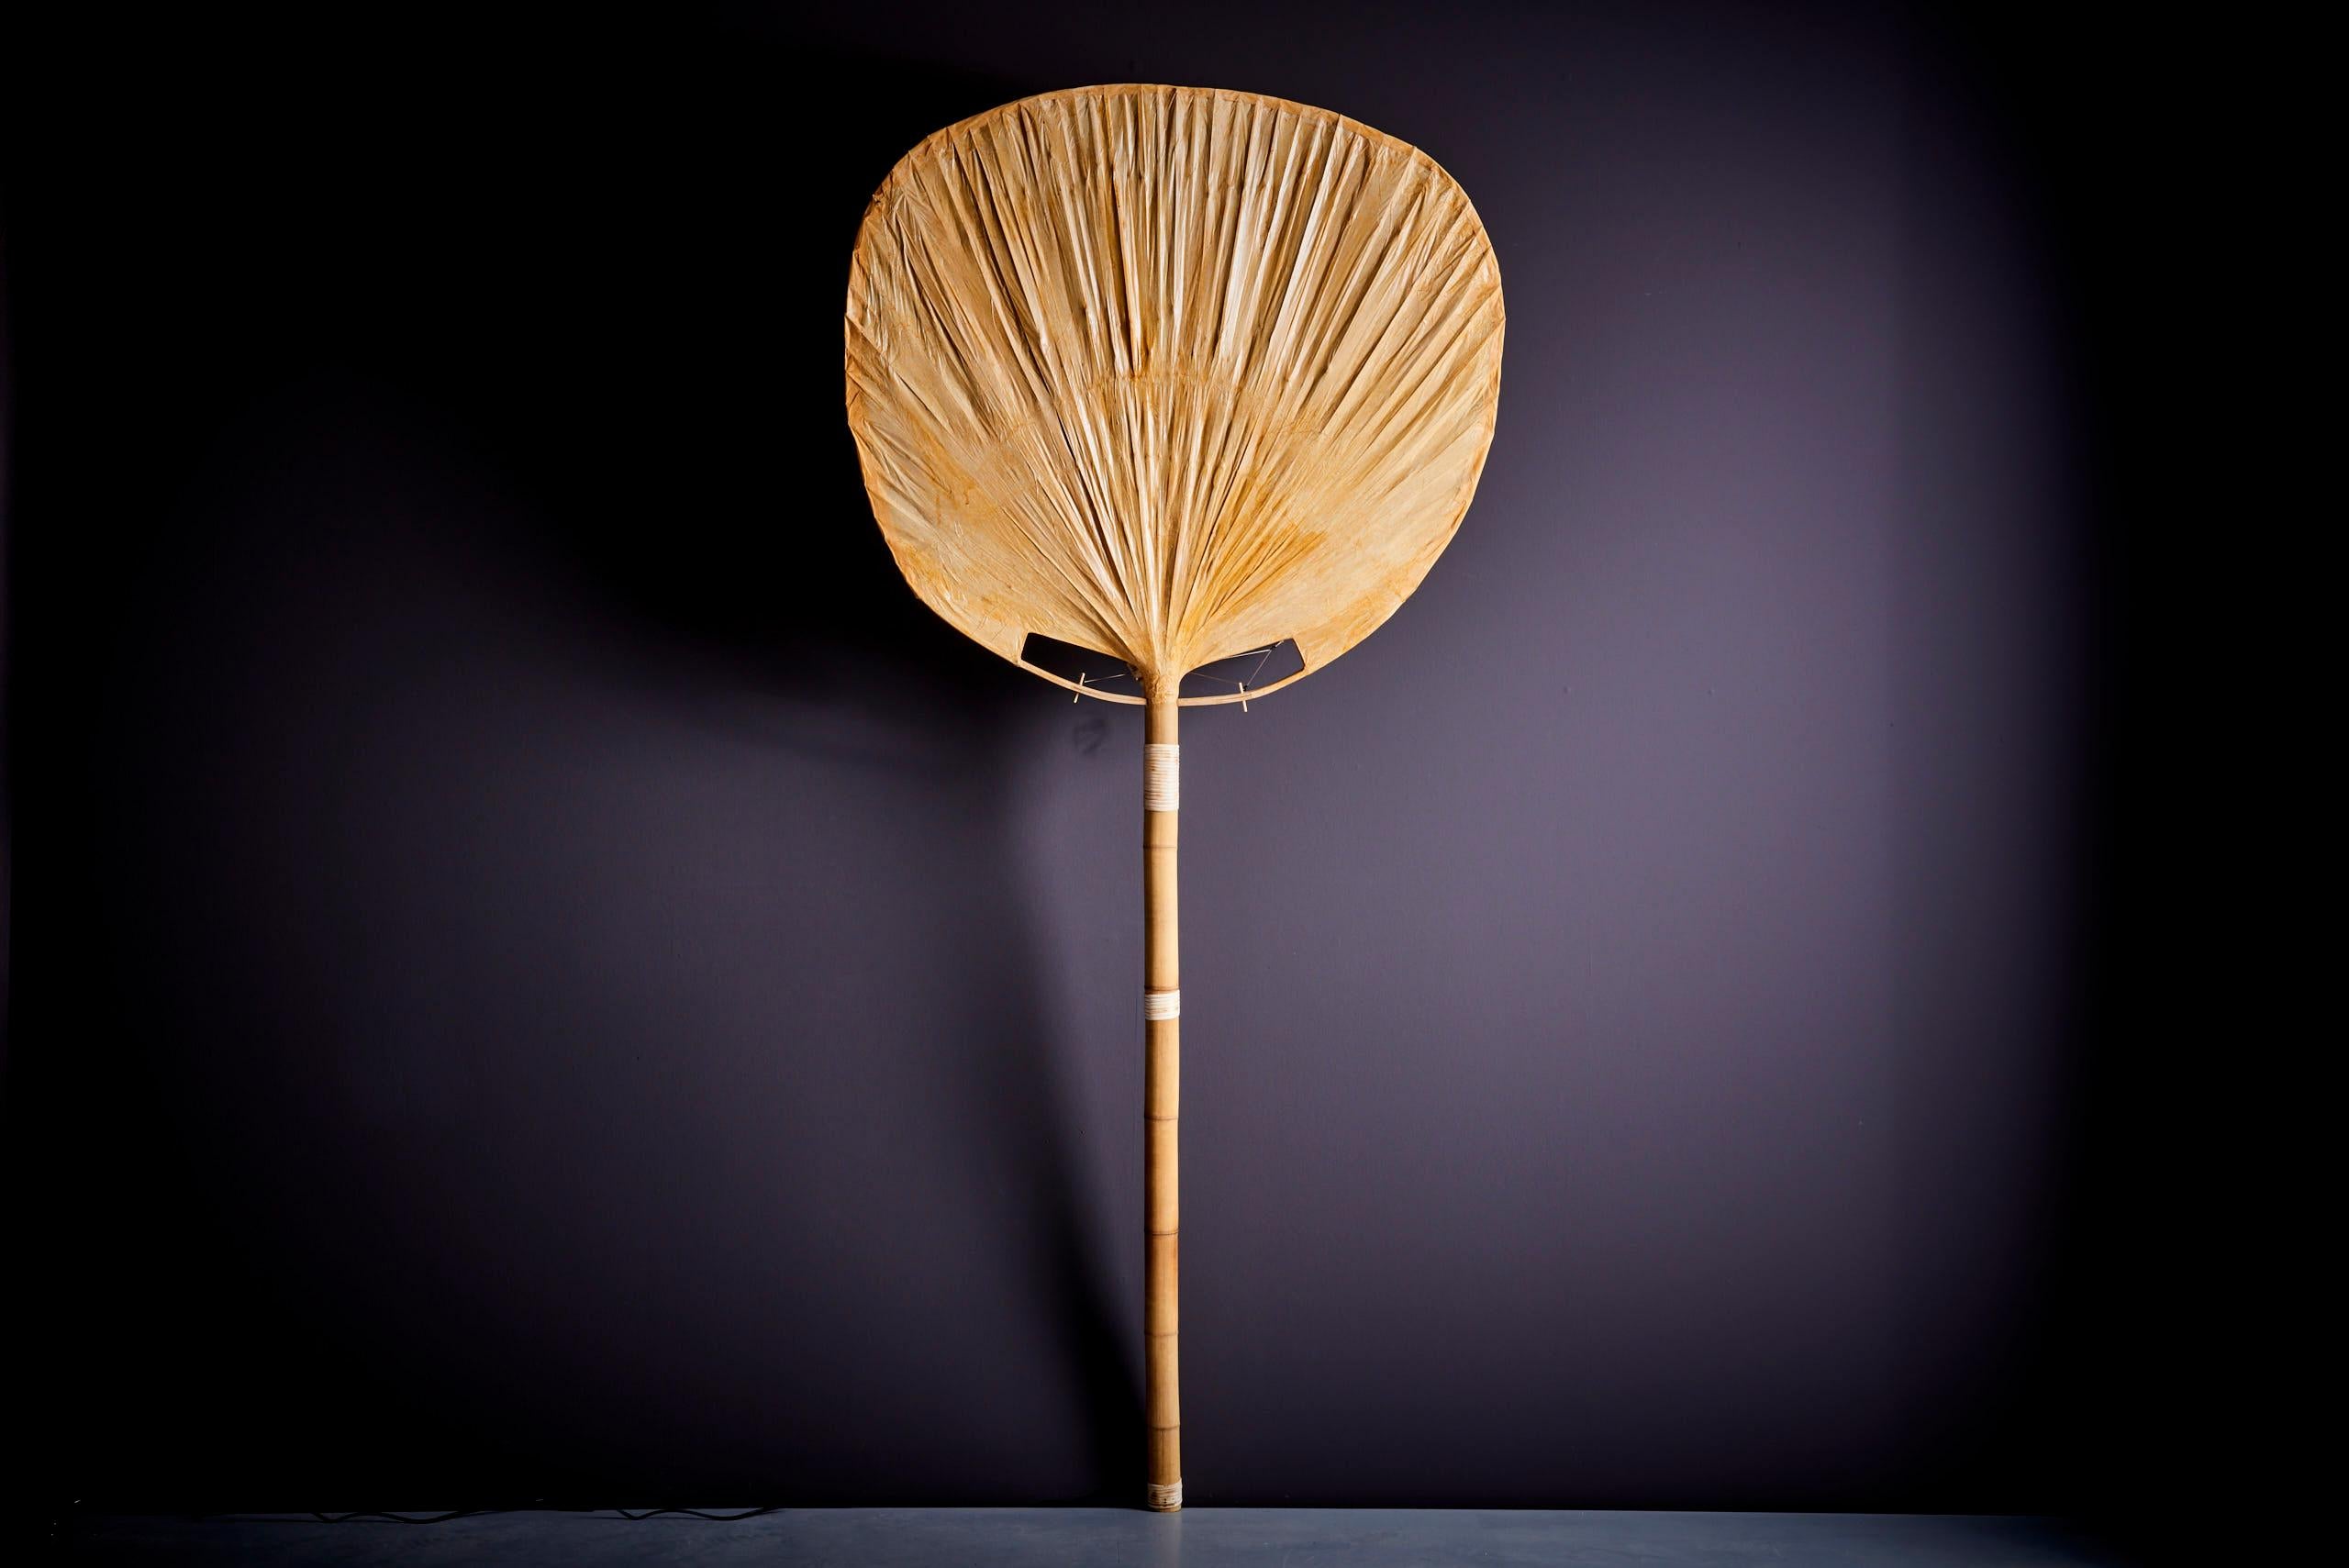 Ingo Maurer Uchiwa floor lamp, 1970s Germany. This floor lamp is inspired by the traditional Japanese Uchiwa fans and made of Japanese rice paper. Ingo Maurer’s interest in paper for lampshades was linked with his interest in Japan. From 1973-1975